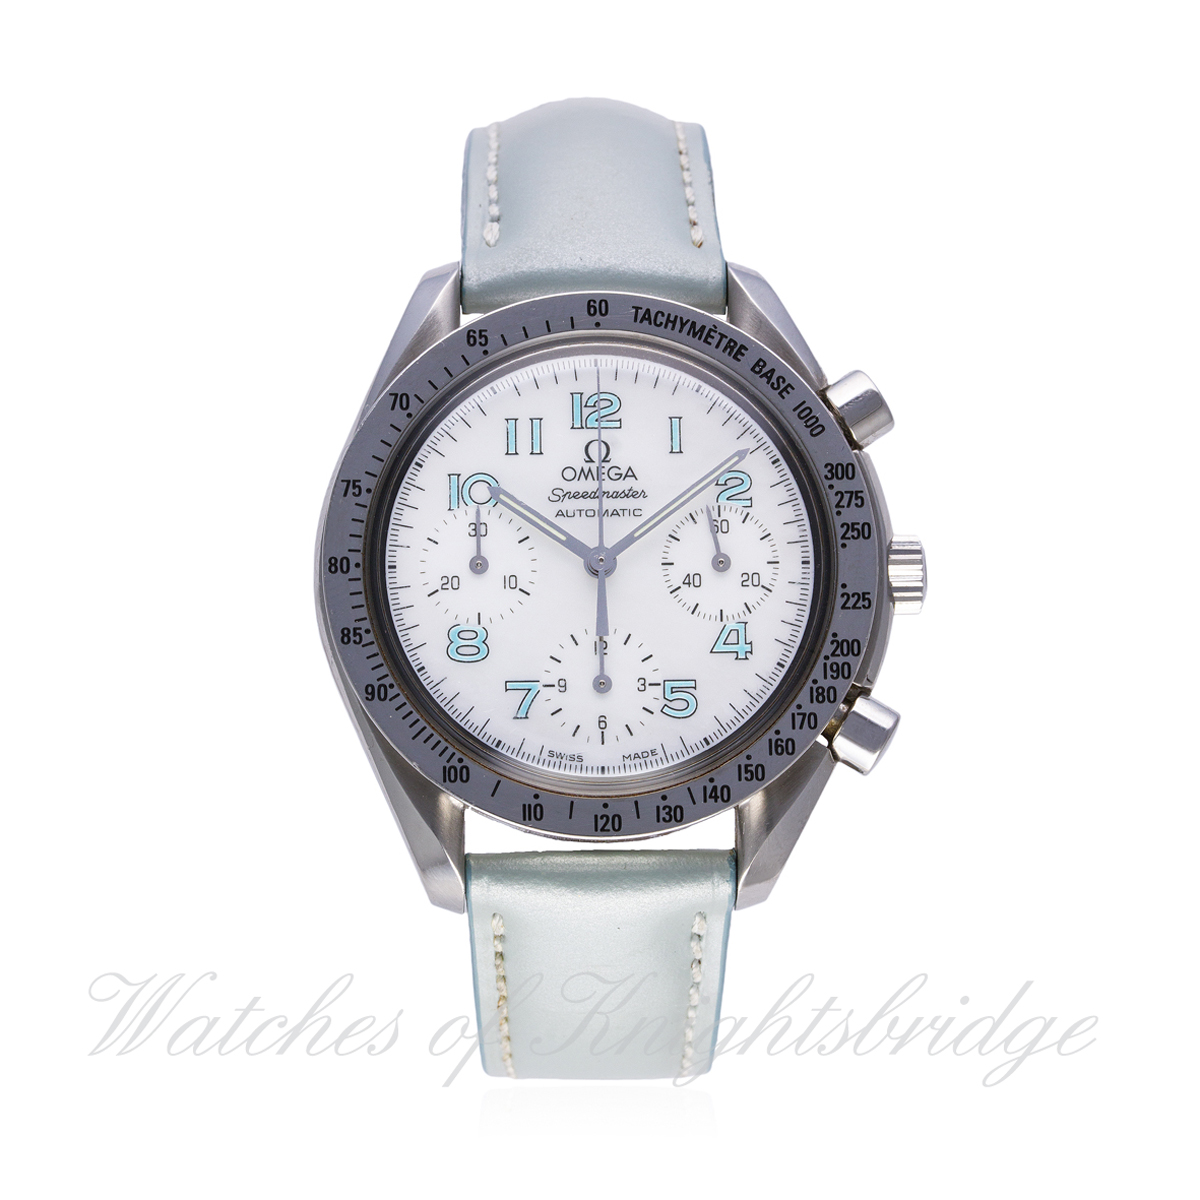 A LADIES STAINLESS STEEL OMEGA SPEEDMASTER AUTOMATIC CHRONOGRAPH WRIST WATCH DATED 2005, REF.